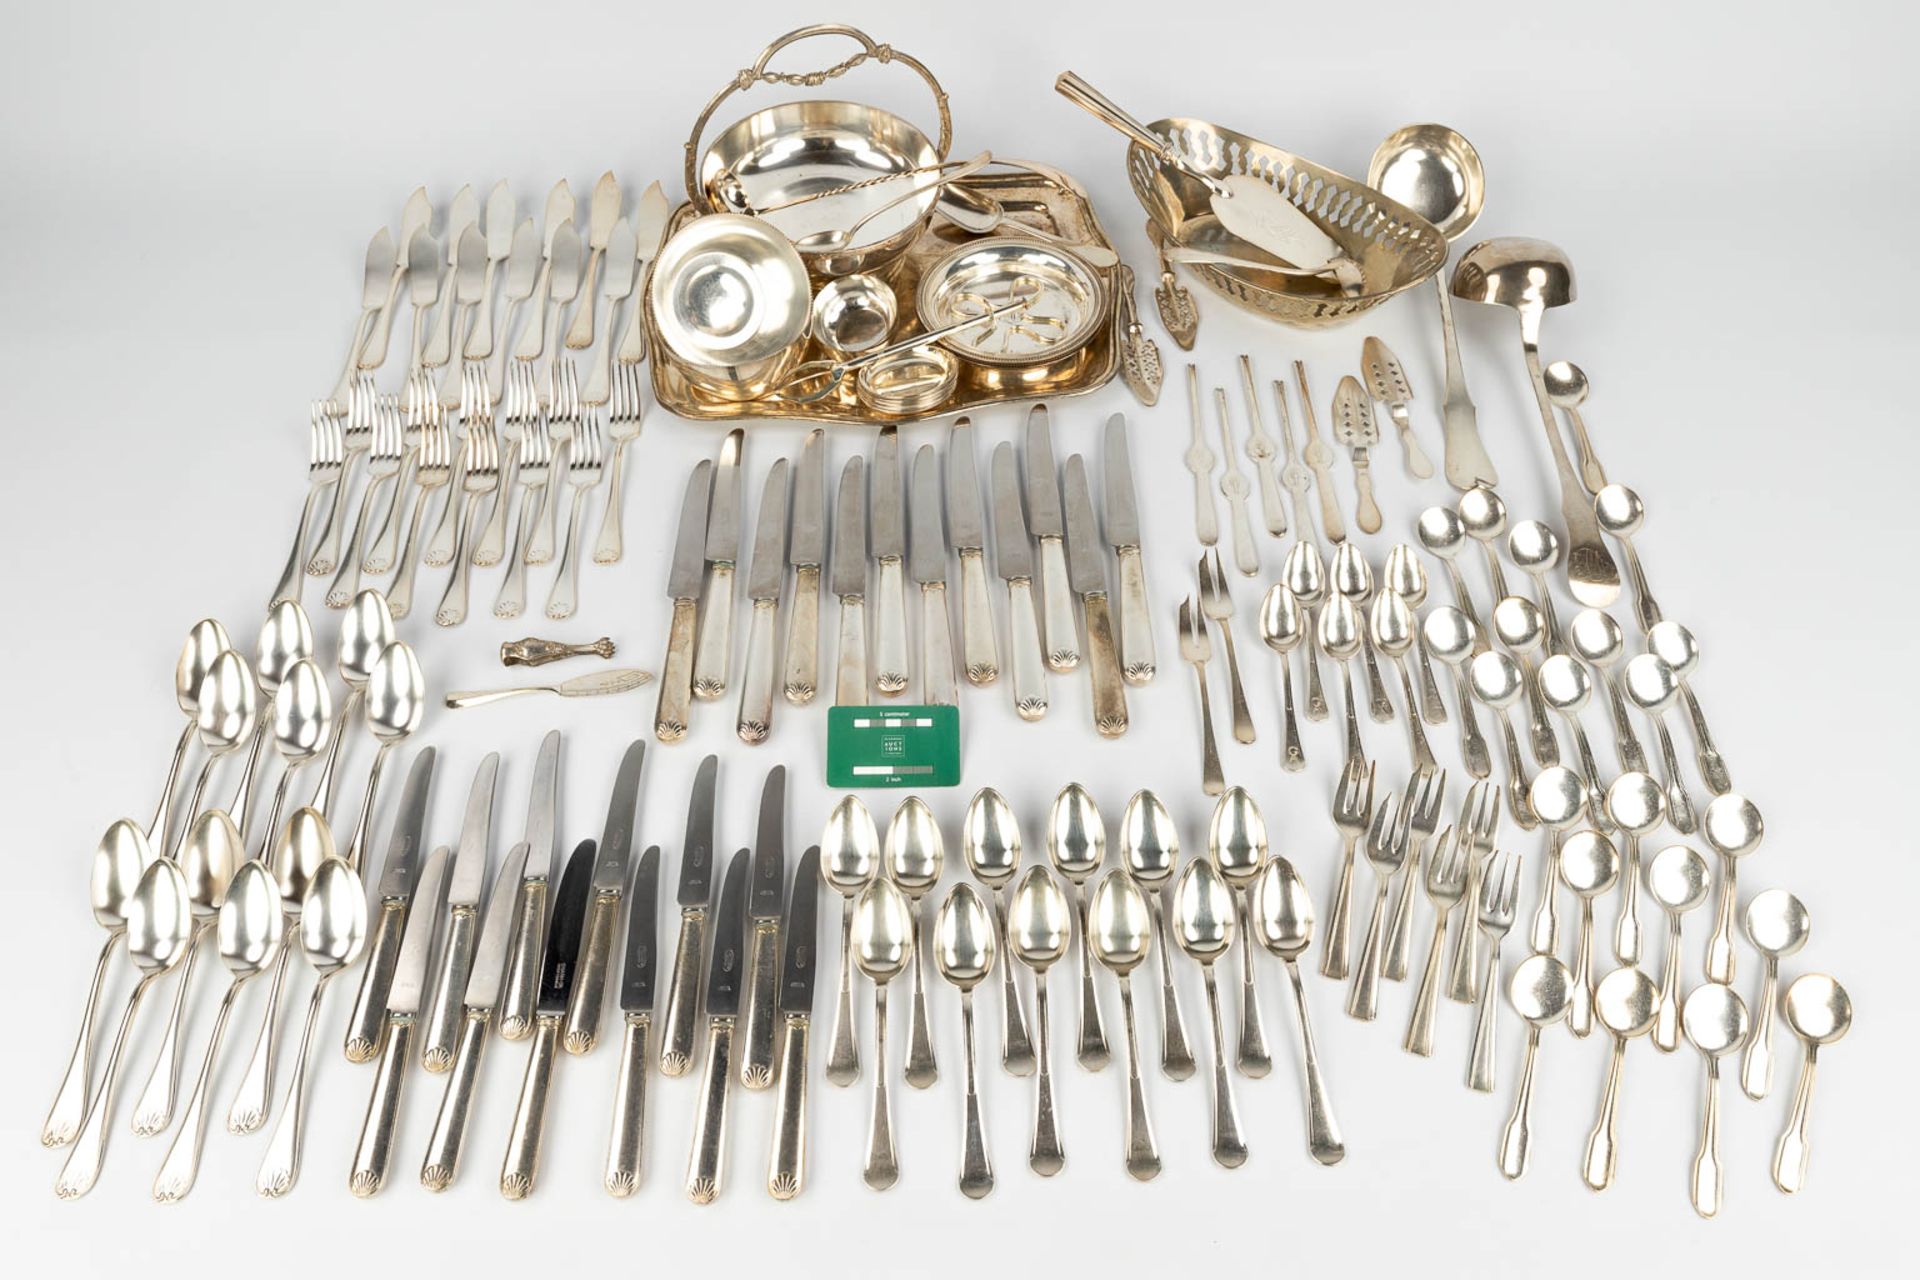 A large collection of cutlery and table accessories made of silver-plated metal. - Image 8 of 12